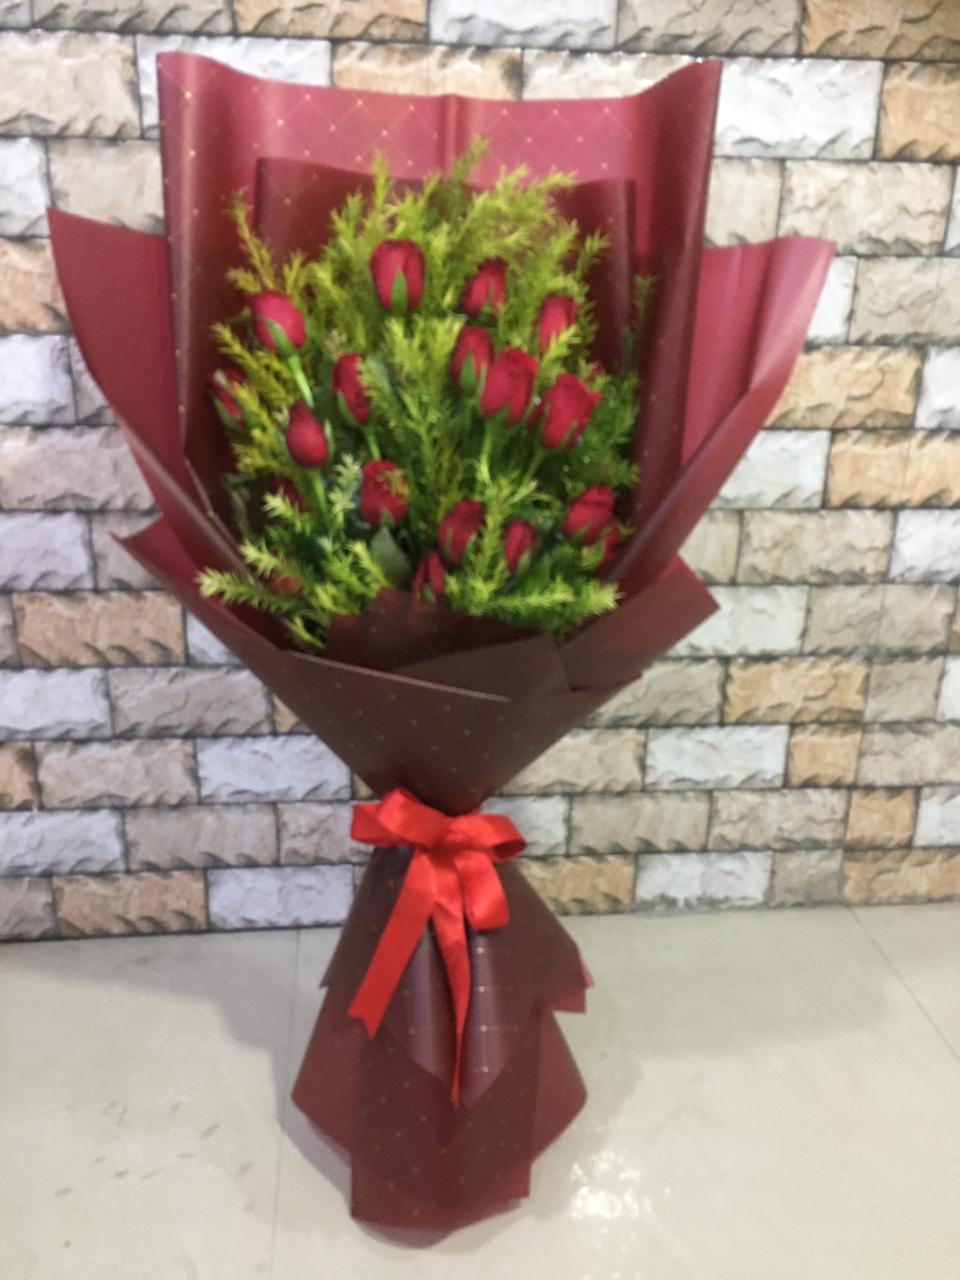 Be My Valentine delivery Sector 74 Noida,
Sector 74 Noida Valentine's Day gifts,
Romantic gift ideas Noida,
Valentine's Day surprises Sector 74,
Anniversary gifts for her Noida,
Same-day Valentine's Day delivery Noida,
Love and romance gifts Sector 74,
Noida Valentine's Day gift delivery service,
Thoughtful Valentine's Day gifts Noida,
Heartfelt gestures Sector 74 Noida,